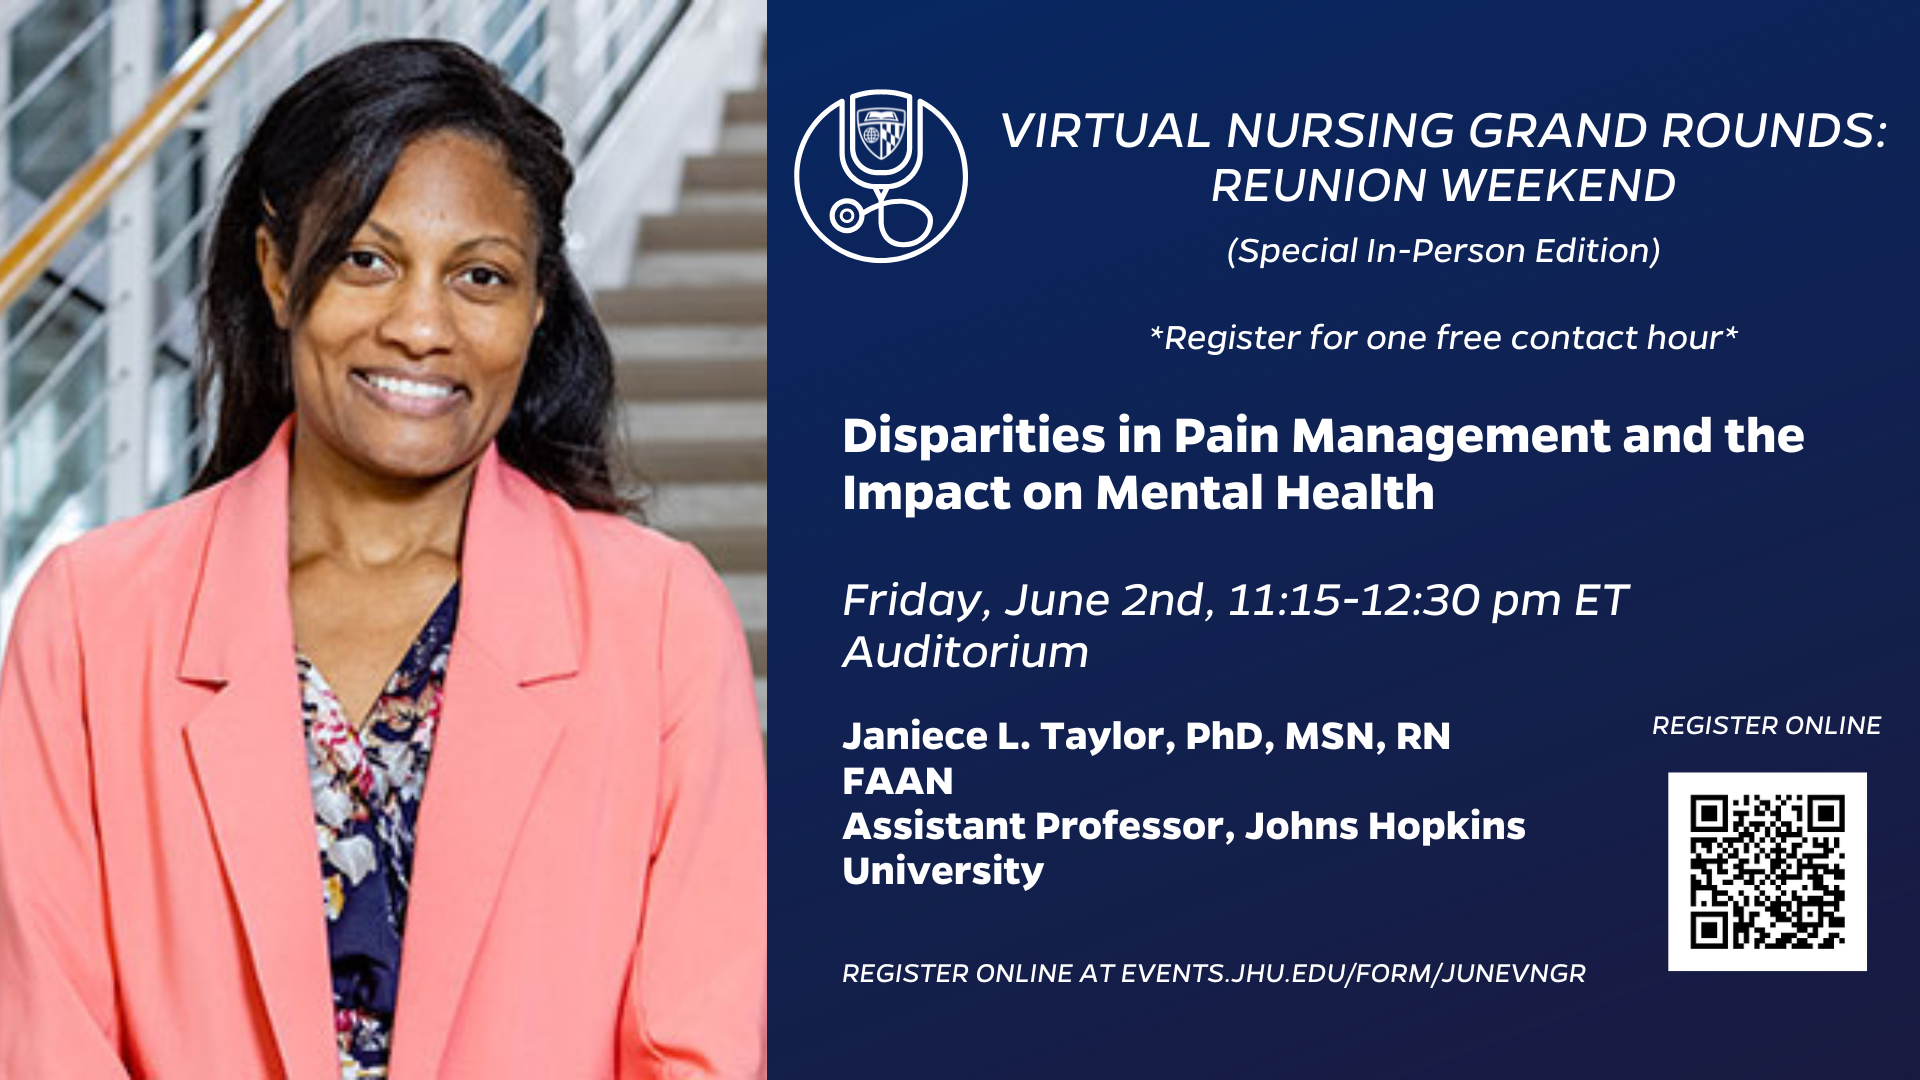 JHSON Virtual Nursing Grand Rounds: Disparities in Pain Management and the Impact on Mental Health